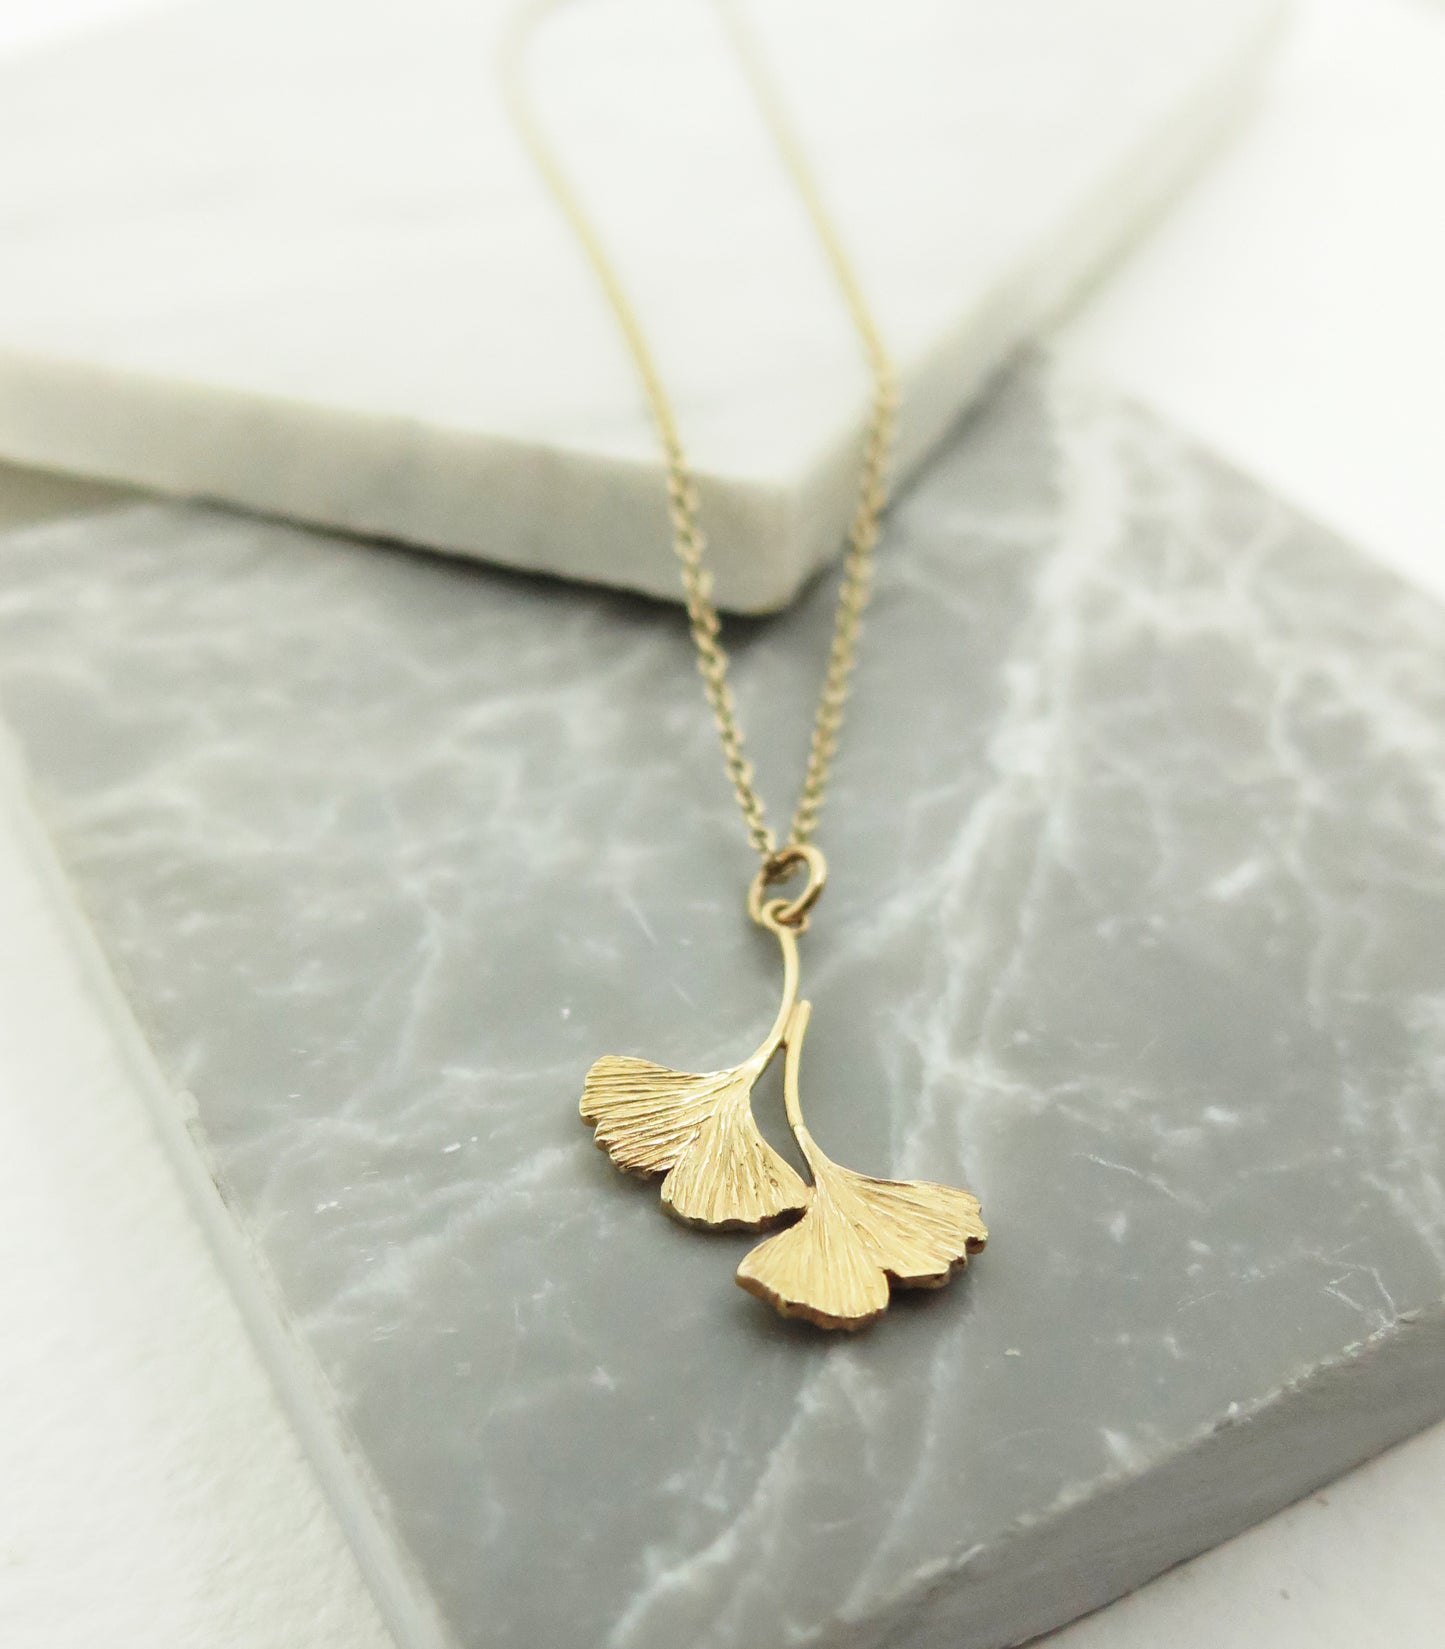 ginkgo leaves, nature jewellery, leaf pendant, delicate necklace, textured leaf jewelry, dainty